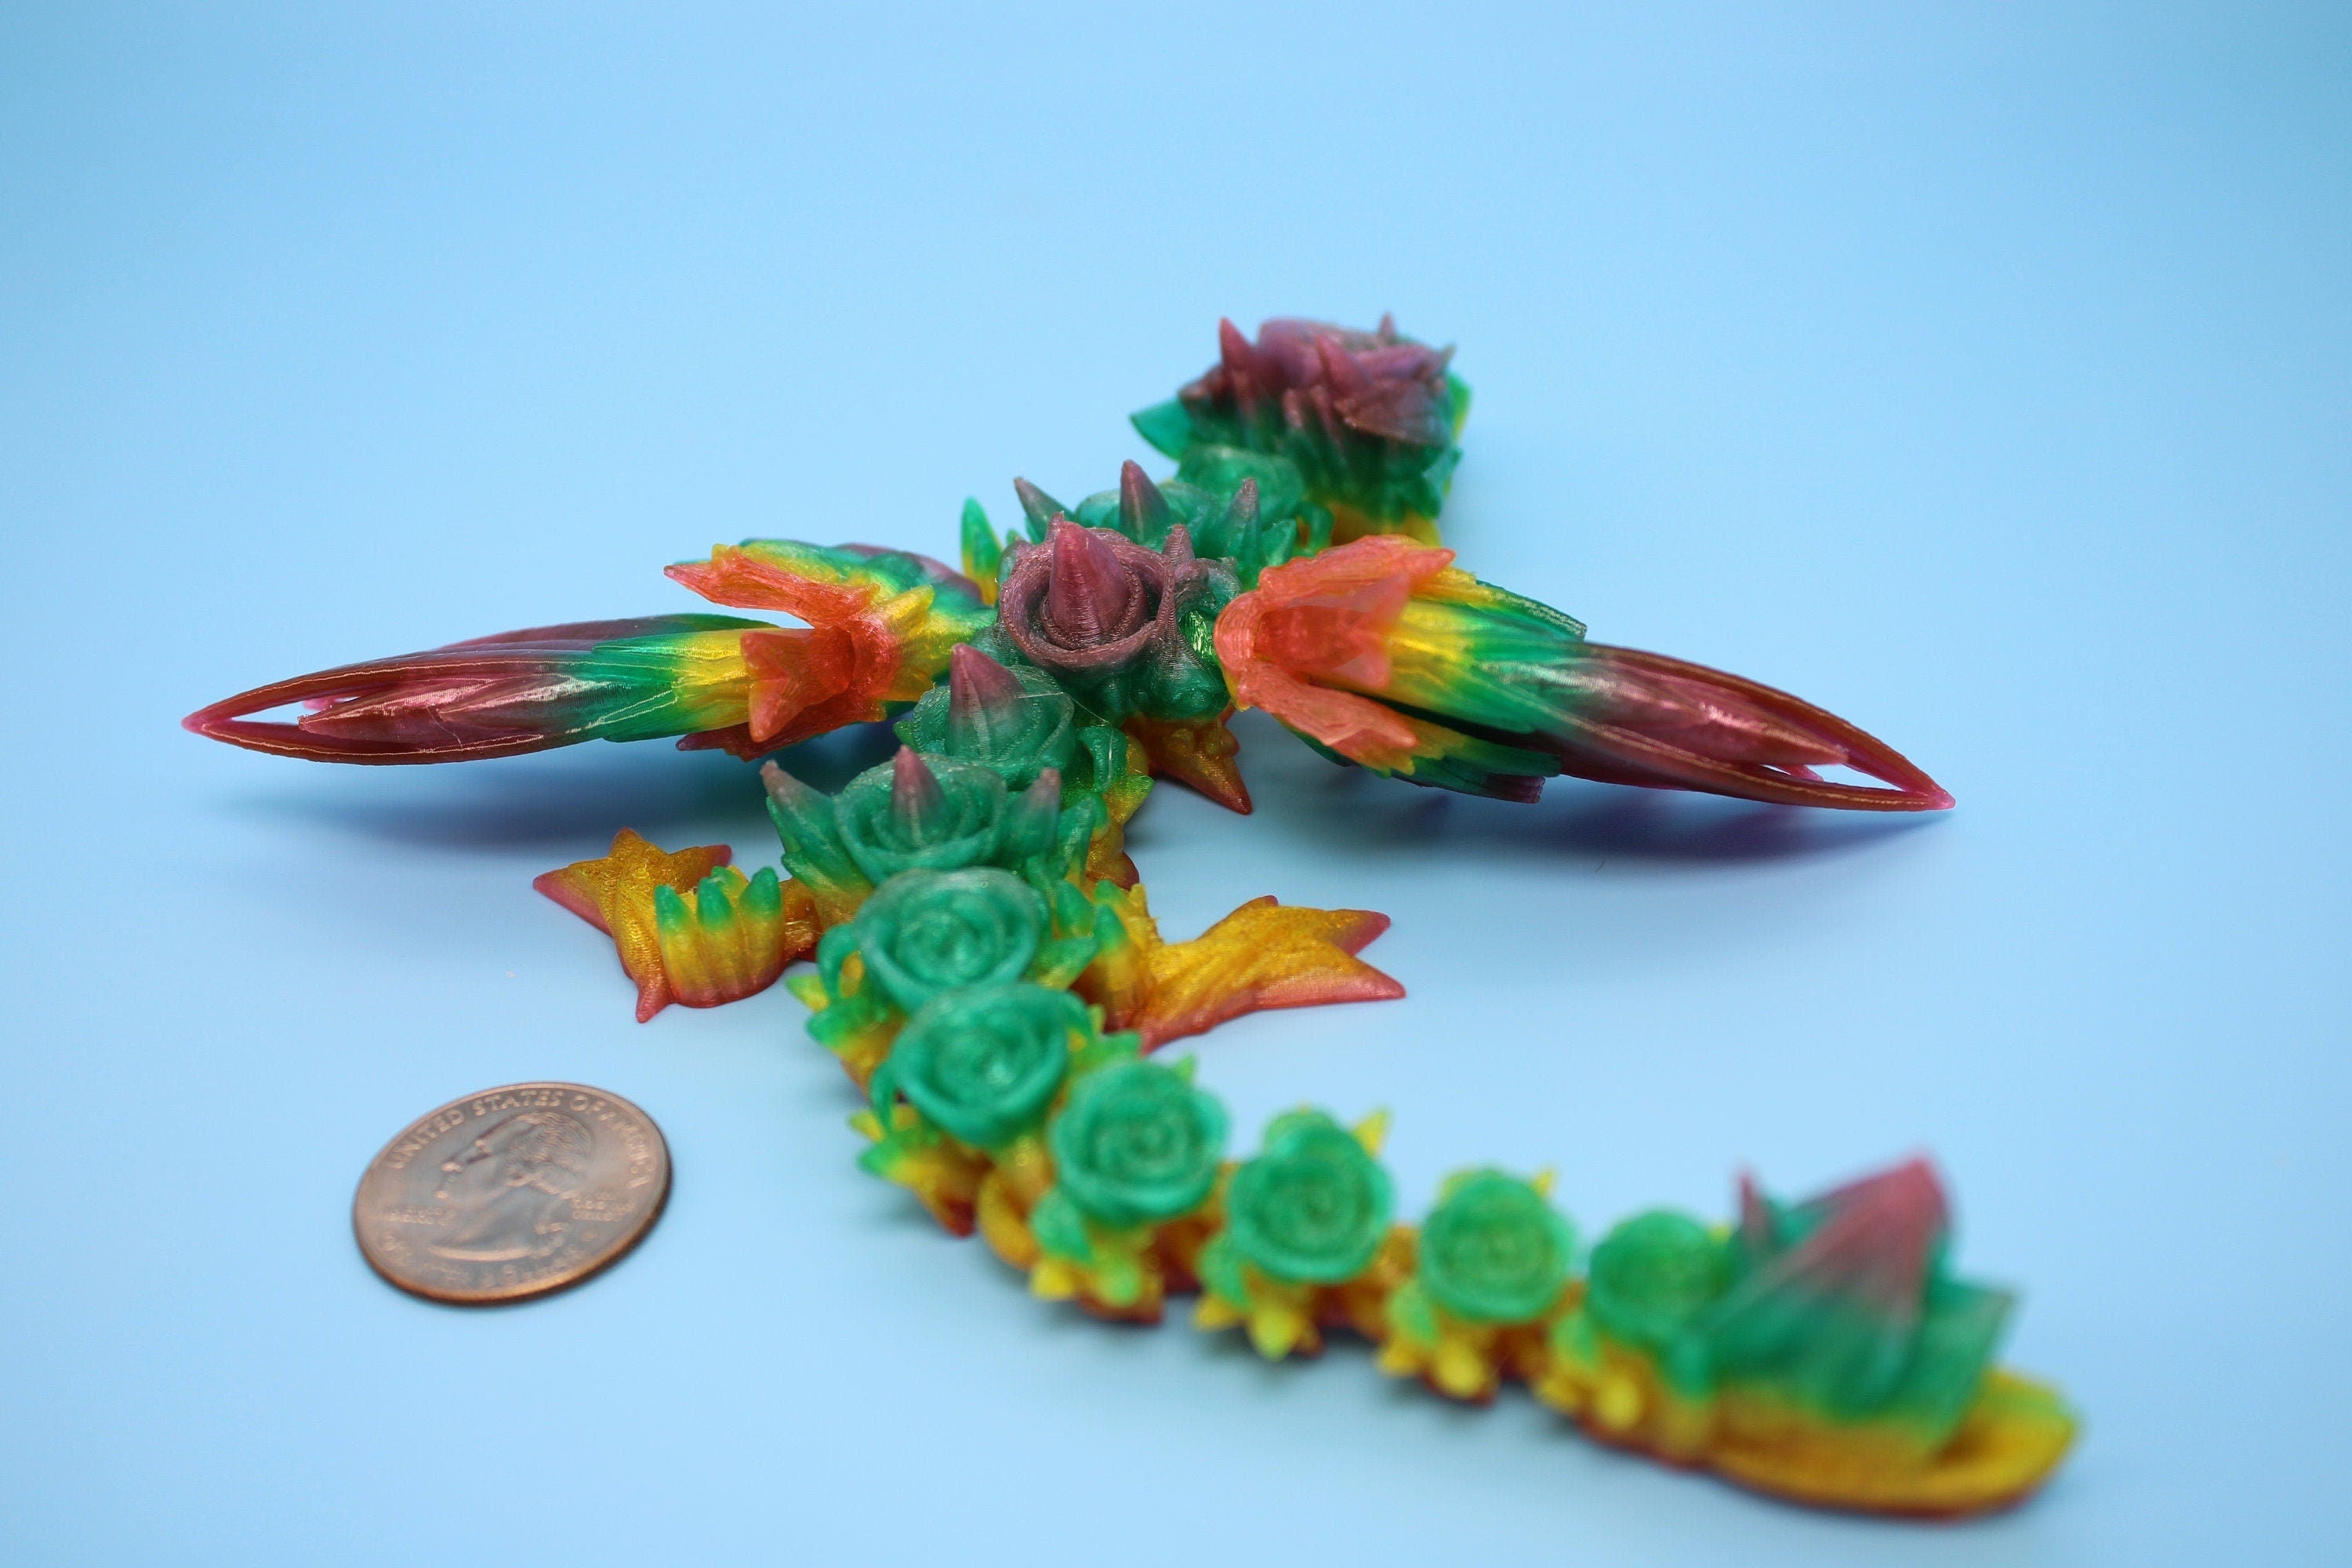 Flexible Miniature Baby Rose Wing Dragon | Rainbow | 3D printed articulating Toy Fidget | Flexi Toy 8.5 in. head to tail | Stress Relief.